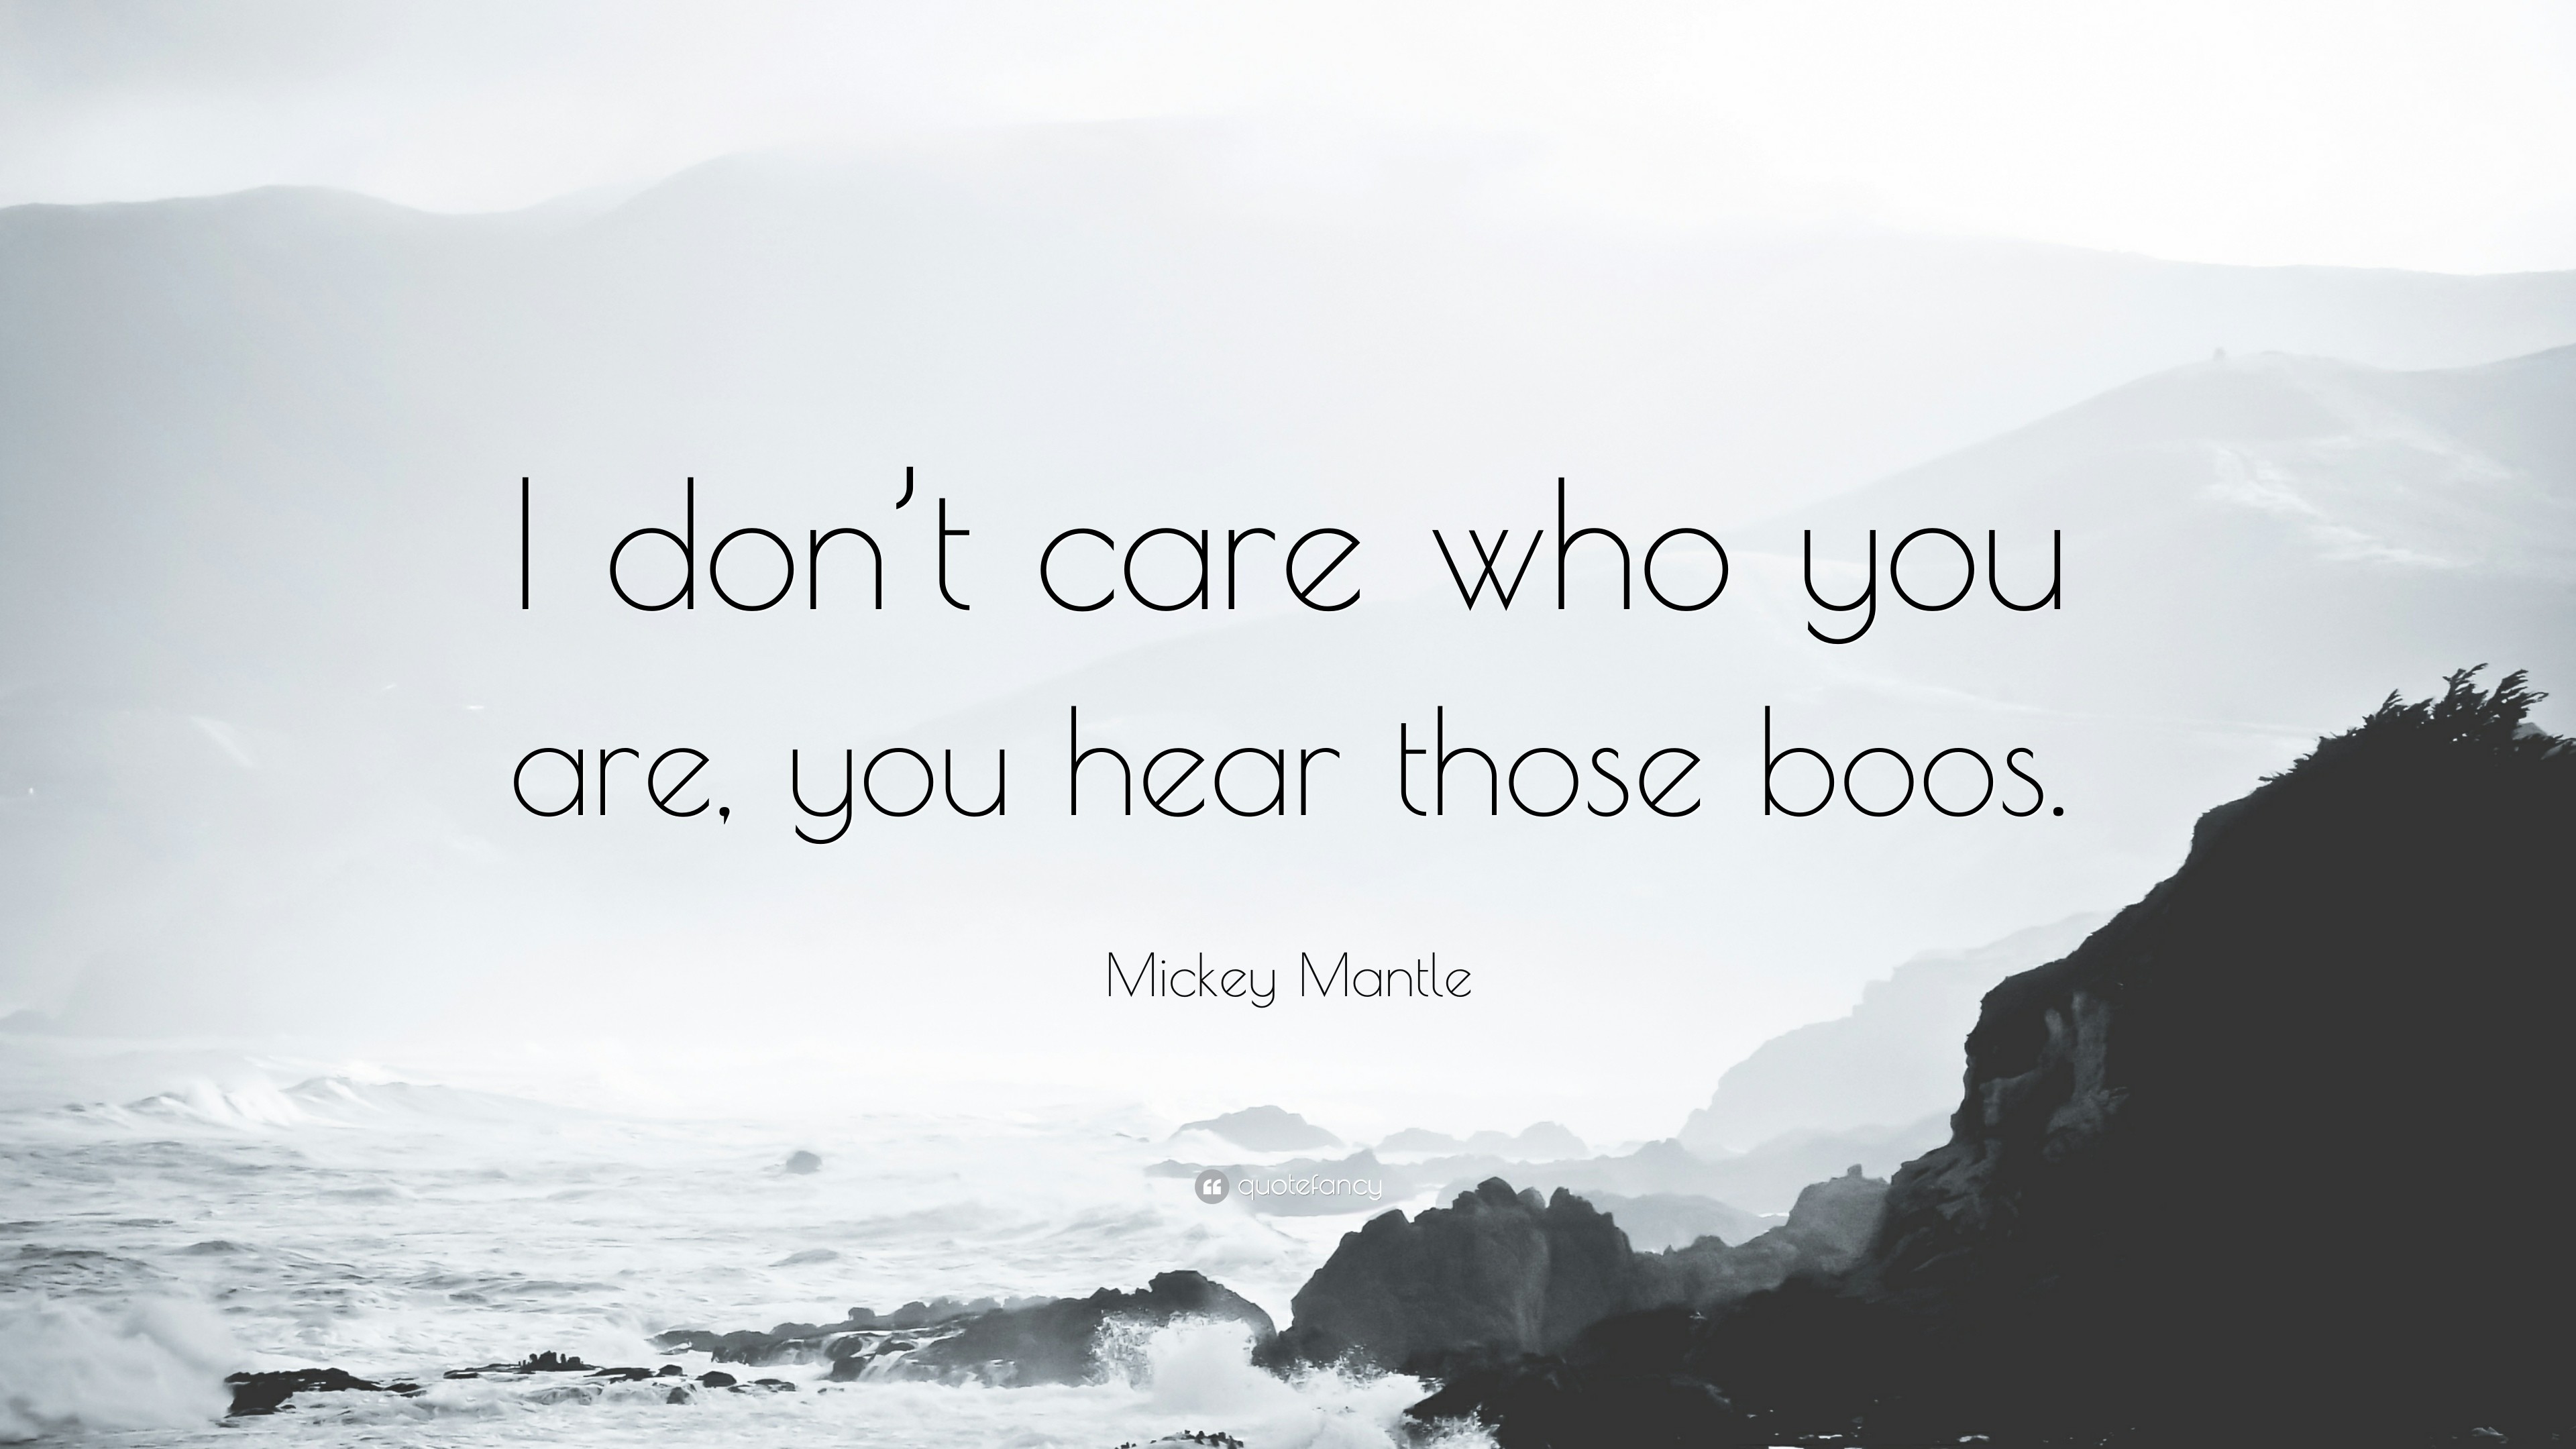 Mickey Mantle Quote: "I don't care who you are, you hear.